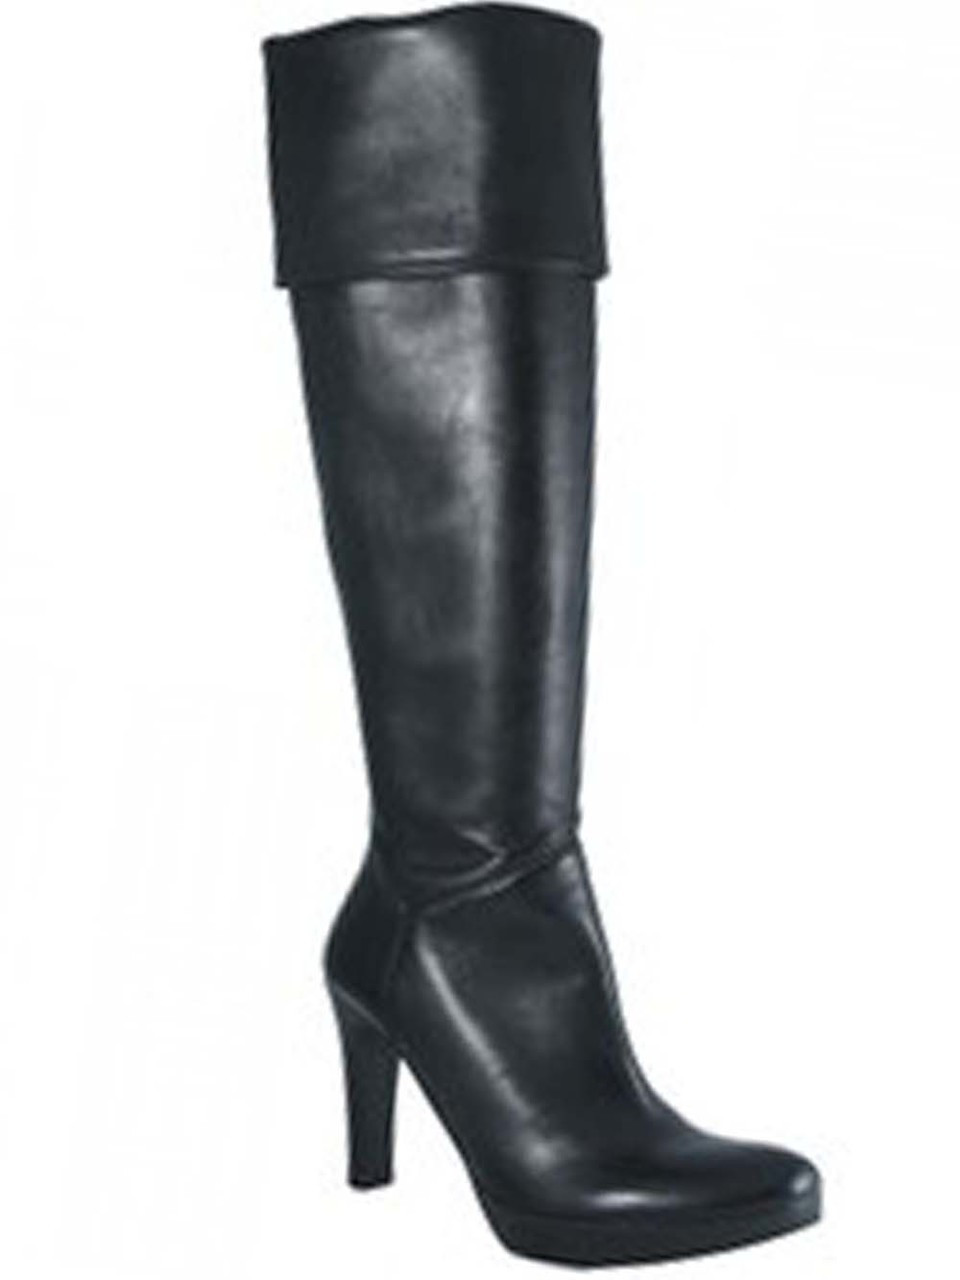 italian leather boots women's shoes